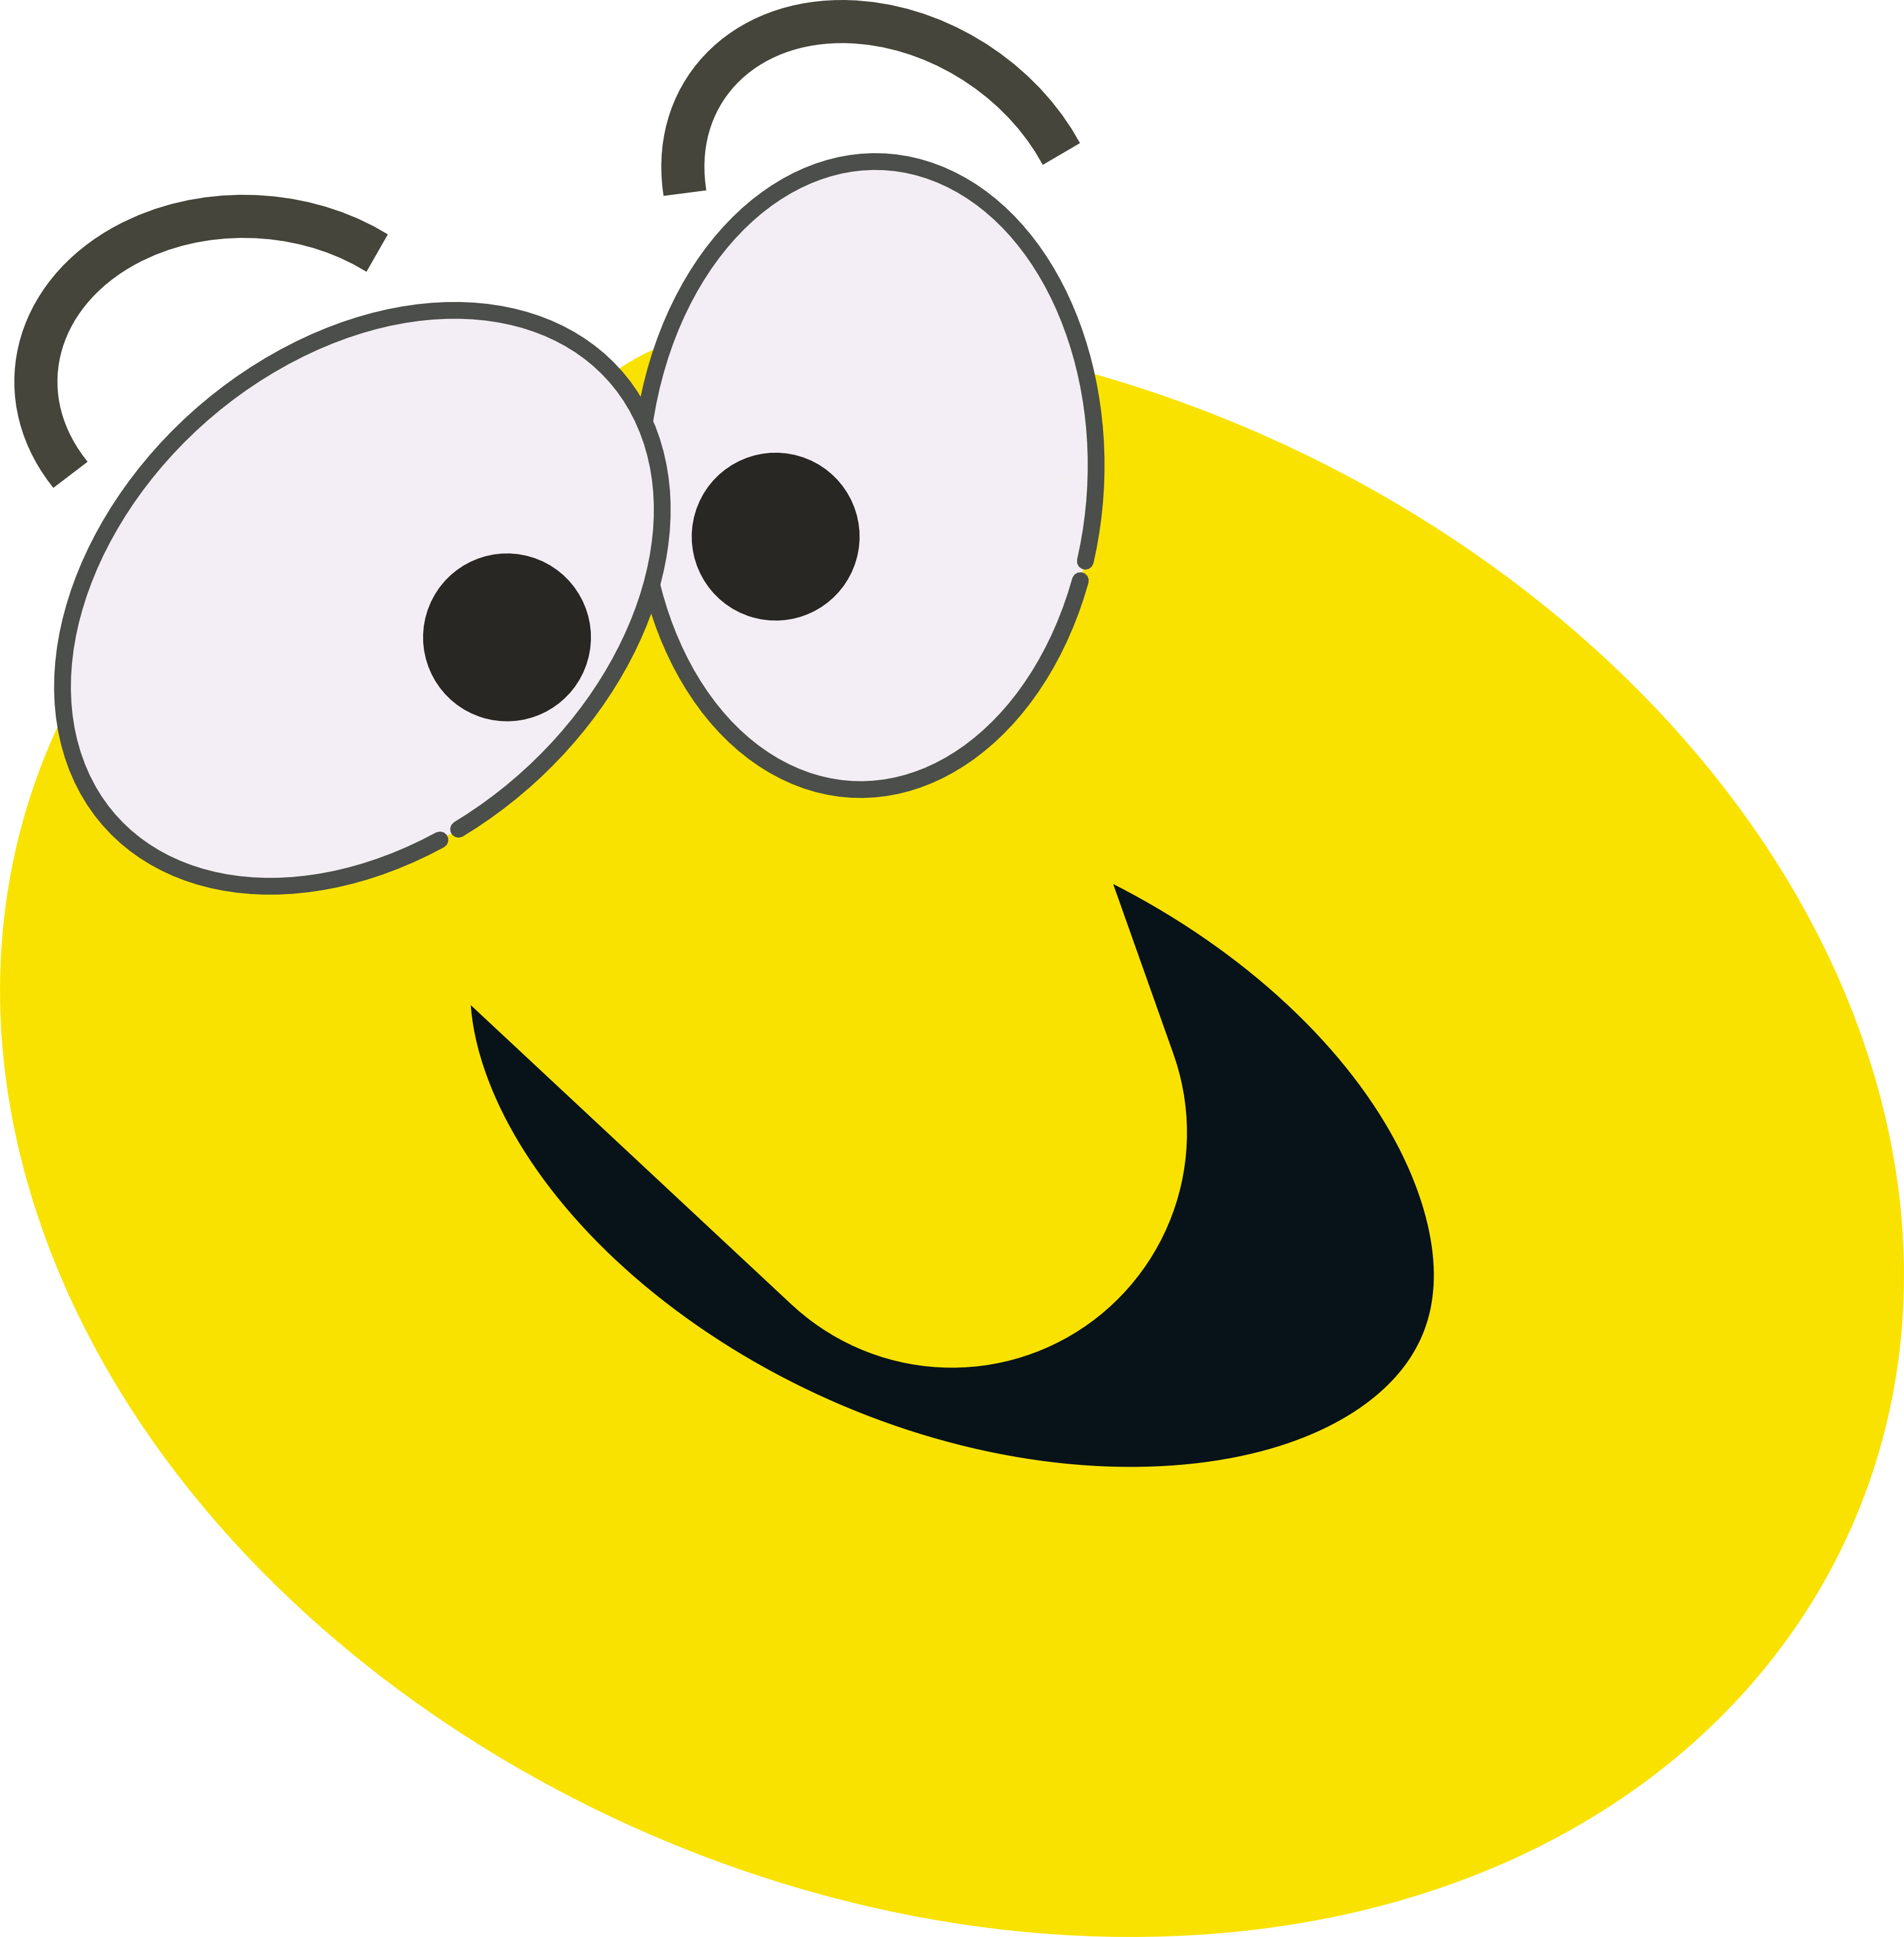 Smiley Face Clip Art Animated | Clipart library - Free Clipart Images